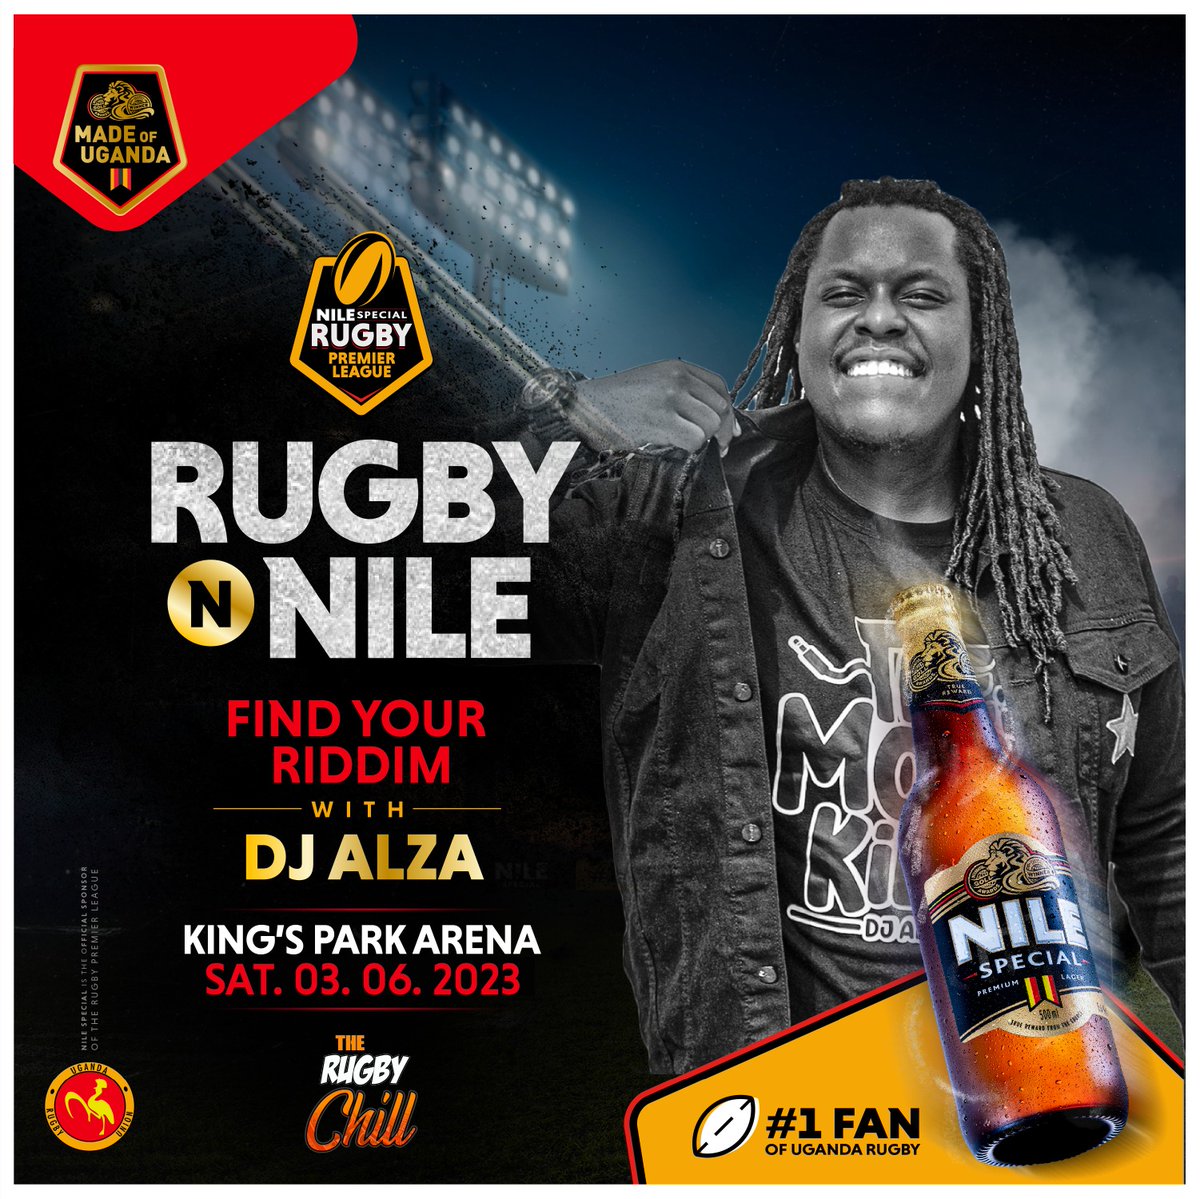 Me jumping on the deejays table when Alza plays Redemption song. 
Dont miss the #RugbynNileParty this Saturday. NileSpecial got us the day and amazing artists, your role is to show up and enjoy the day
#MadeOfUganda